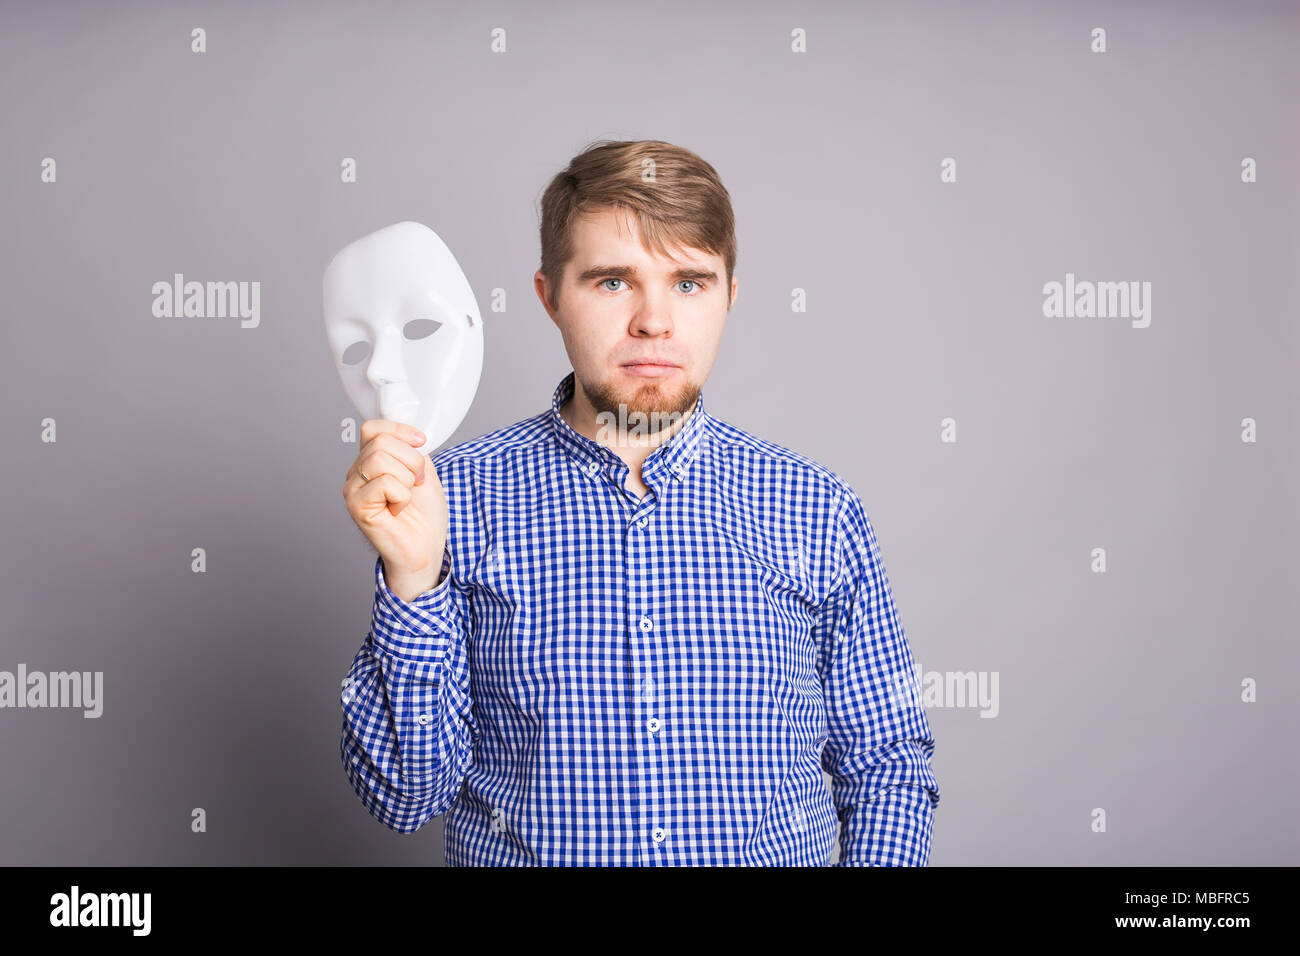 young man taking off plain white mask revealing face, gray background ...